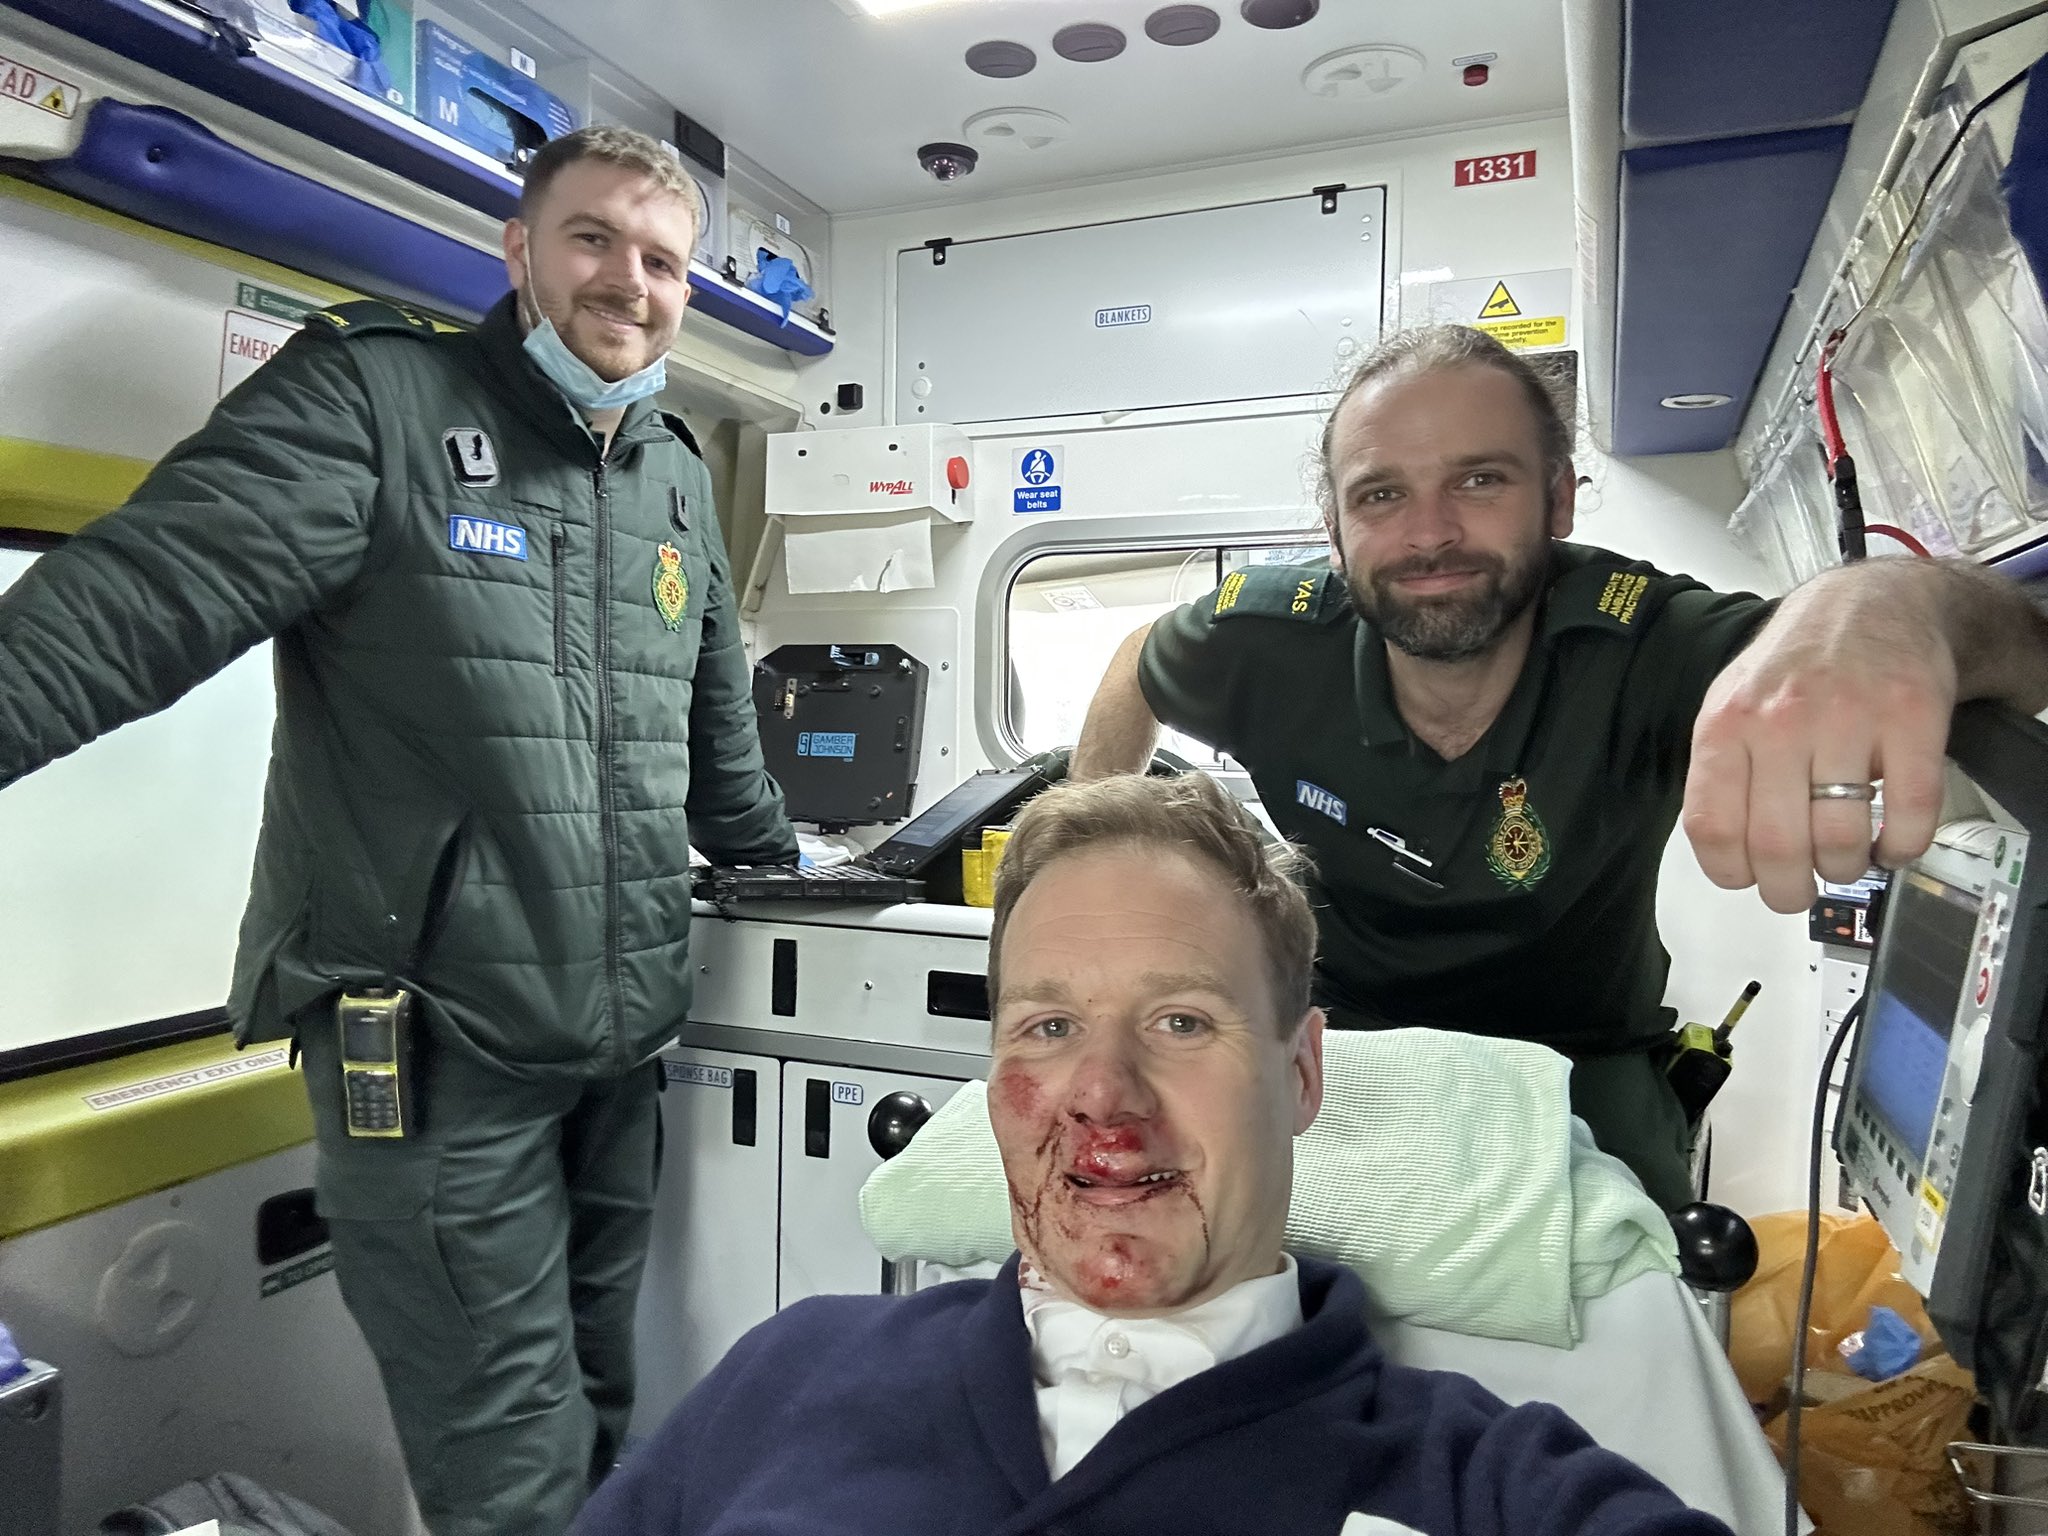 Dan Walker showing his injuries after his accident